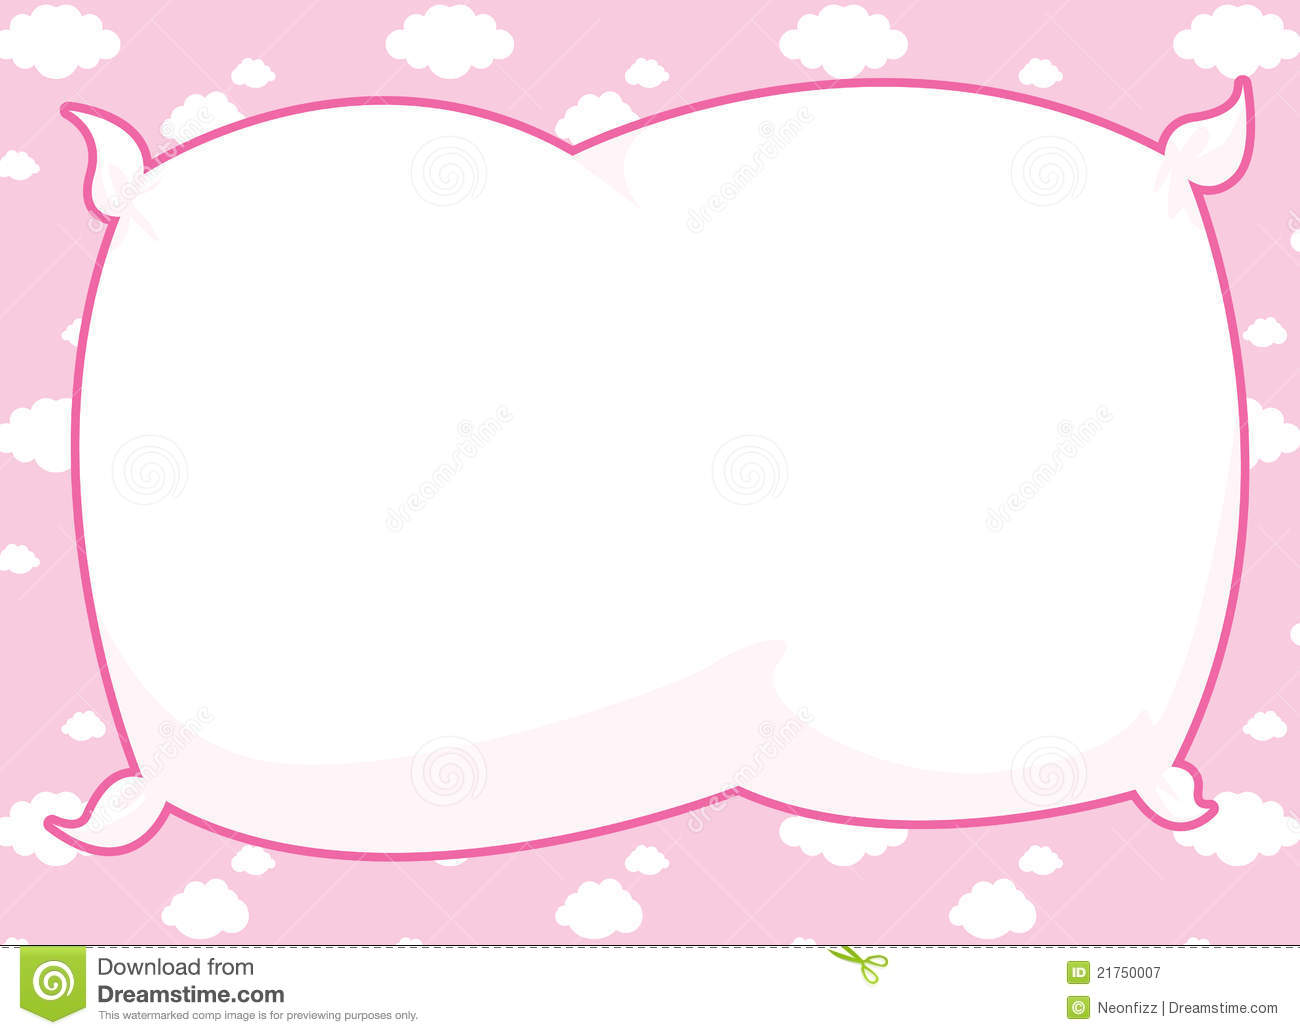 Pink Pillow Frame Royalty Free Stock Photography   Image  21750007